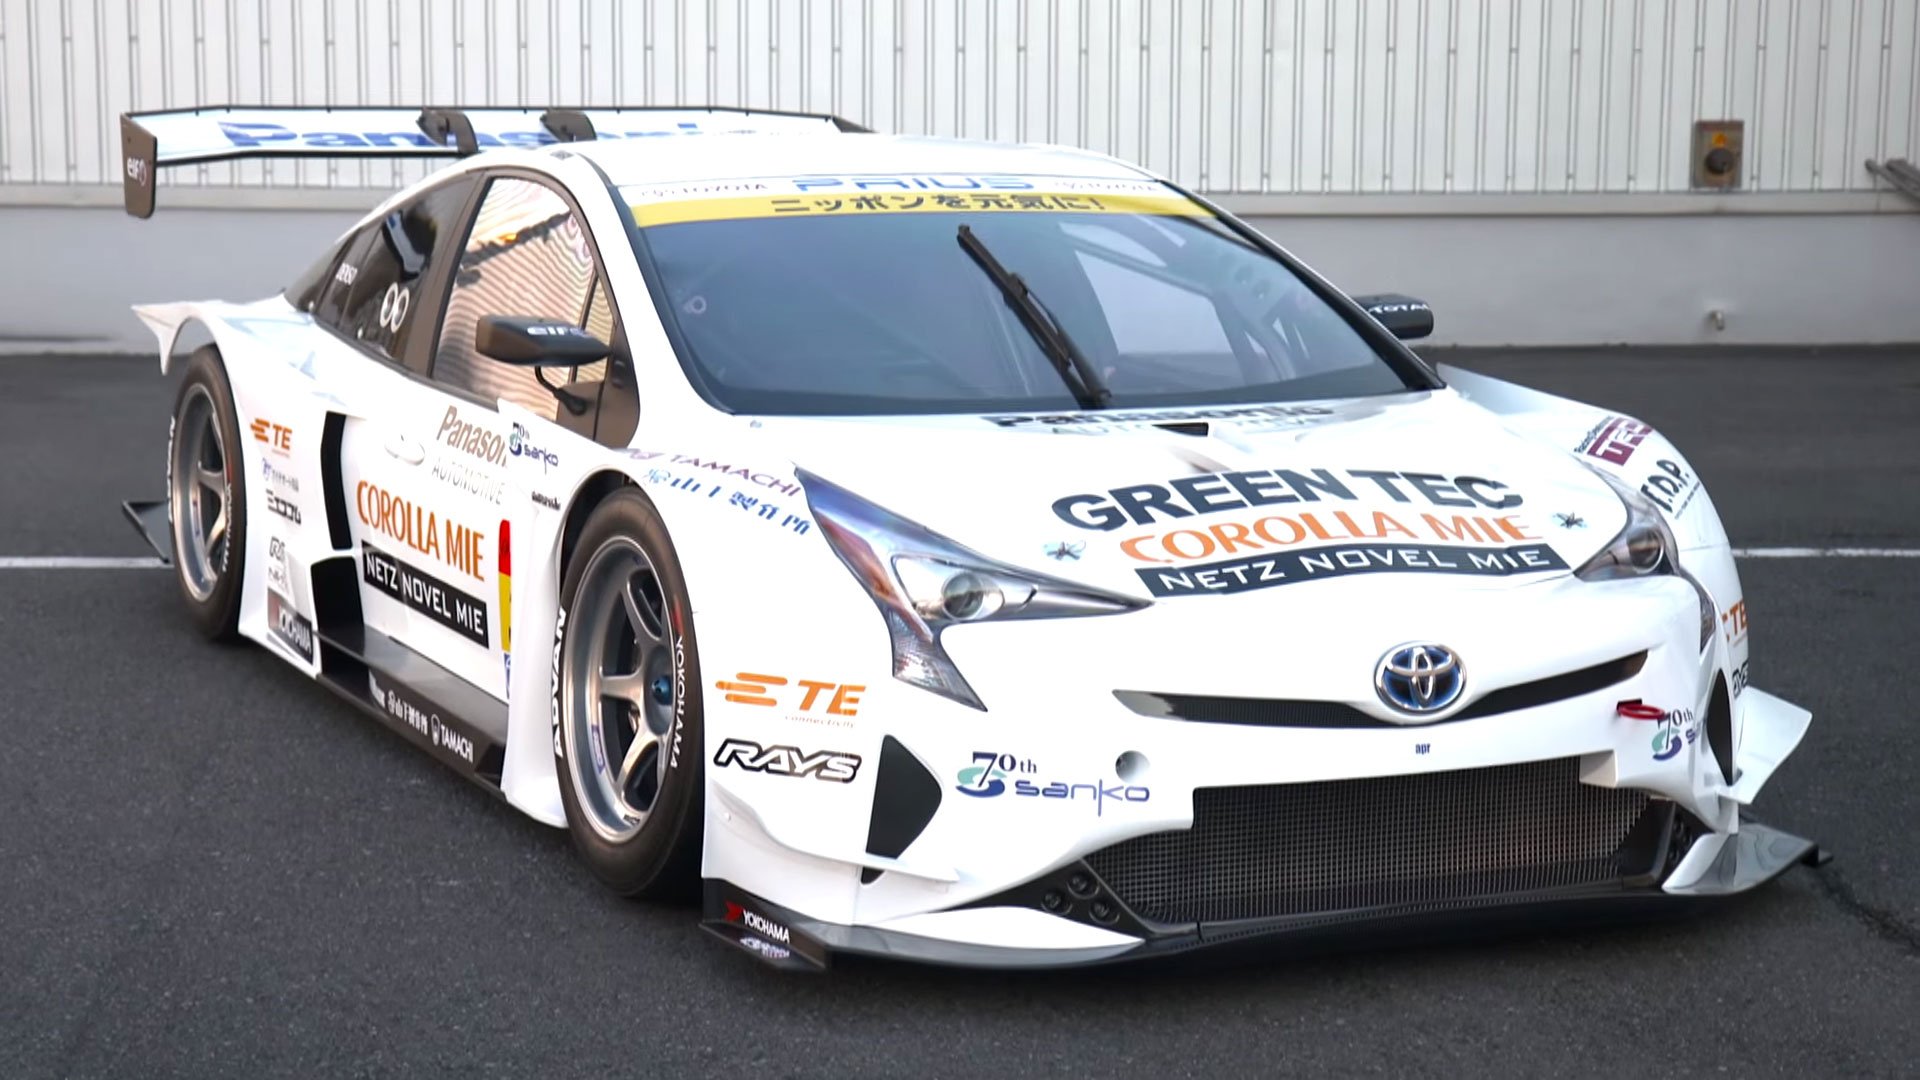 SJB Classic Article - Toyota Reveal its new Prius GT300 Racer.